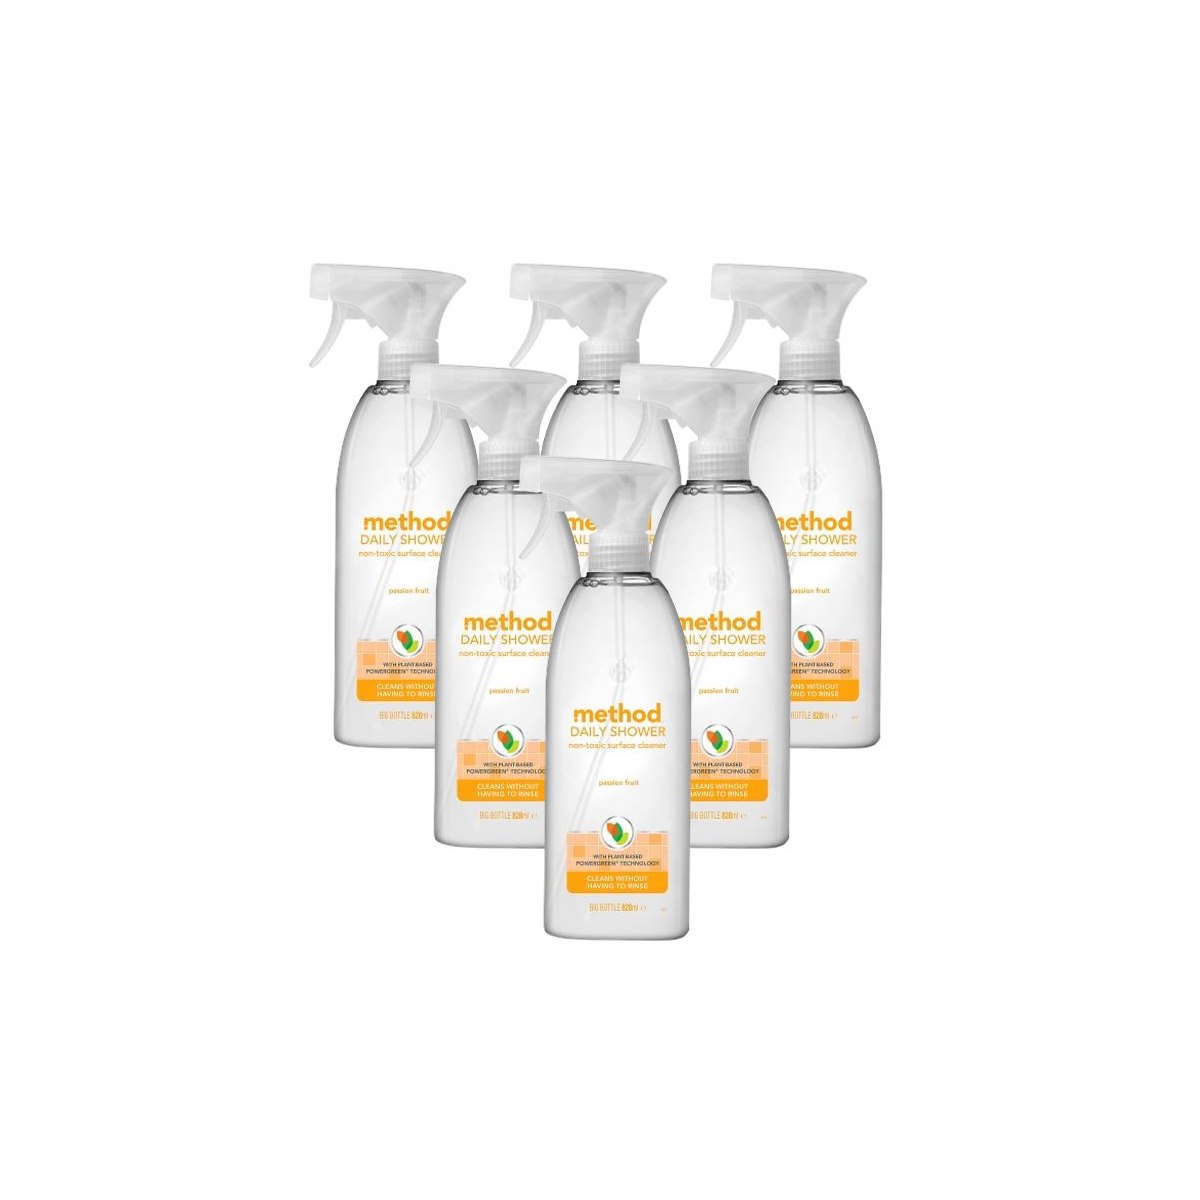 Case of 6 x Method Daily Shower Cleaner Passion Fruit 828ml